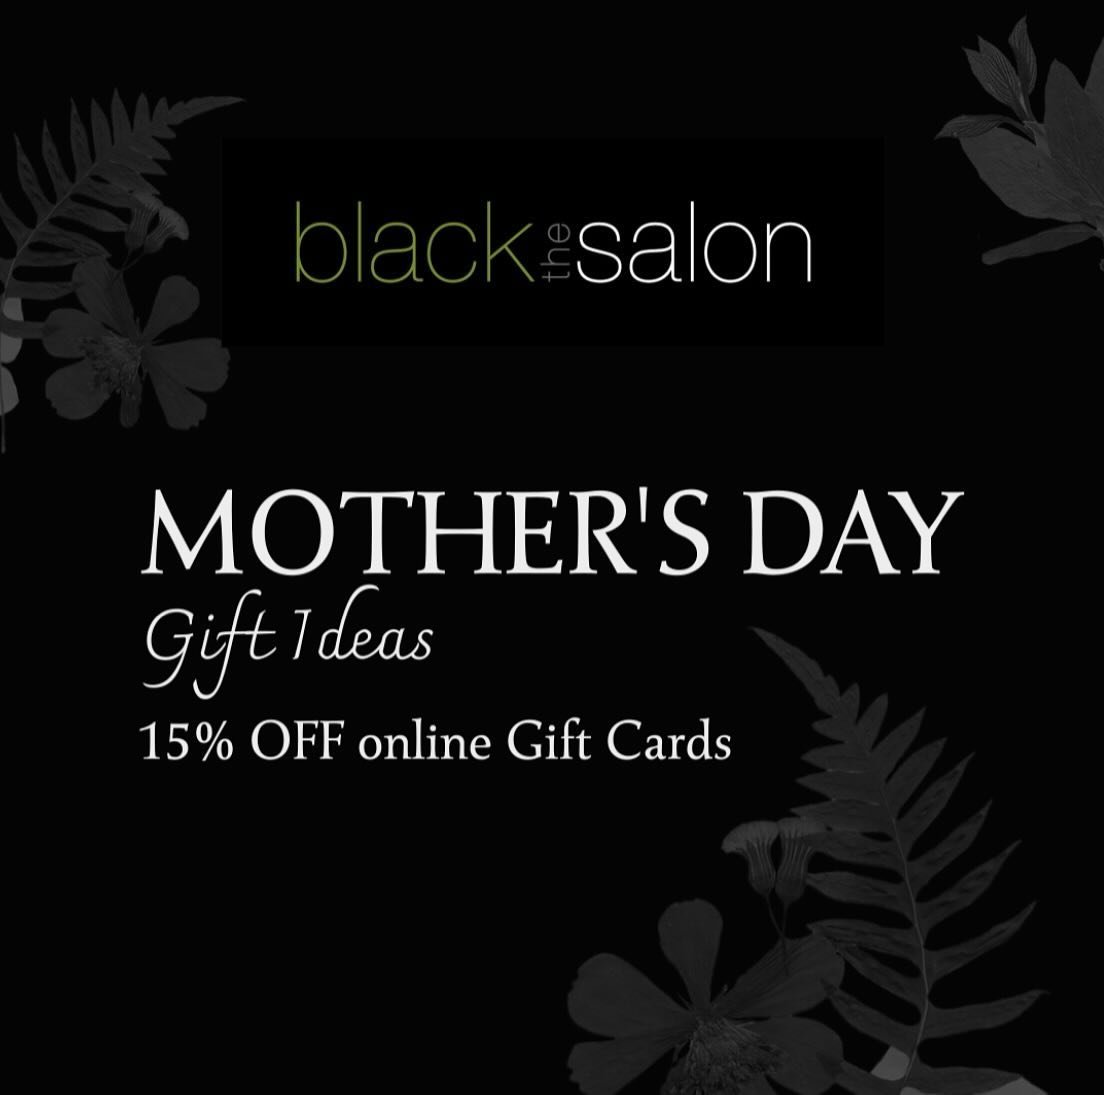 Give mom the gift to Beauty purchase online gift cards now through Mother&rsquo;s Day for 15% off at www.blackthesalon.com #bestofdetroit